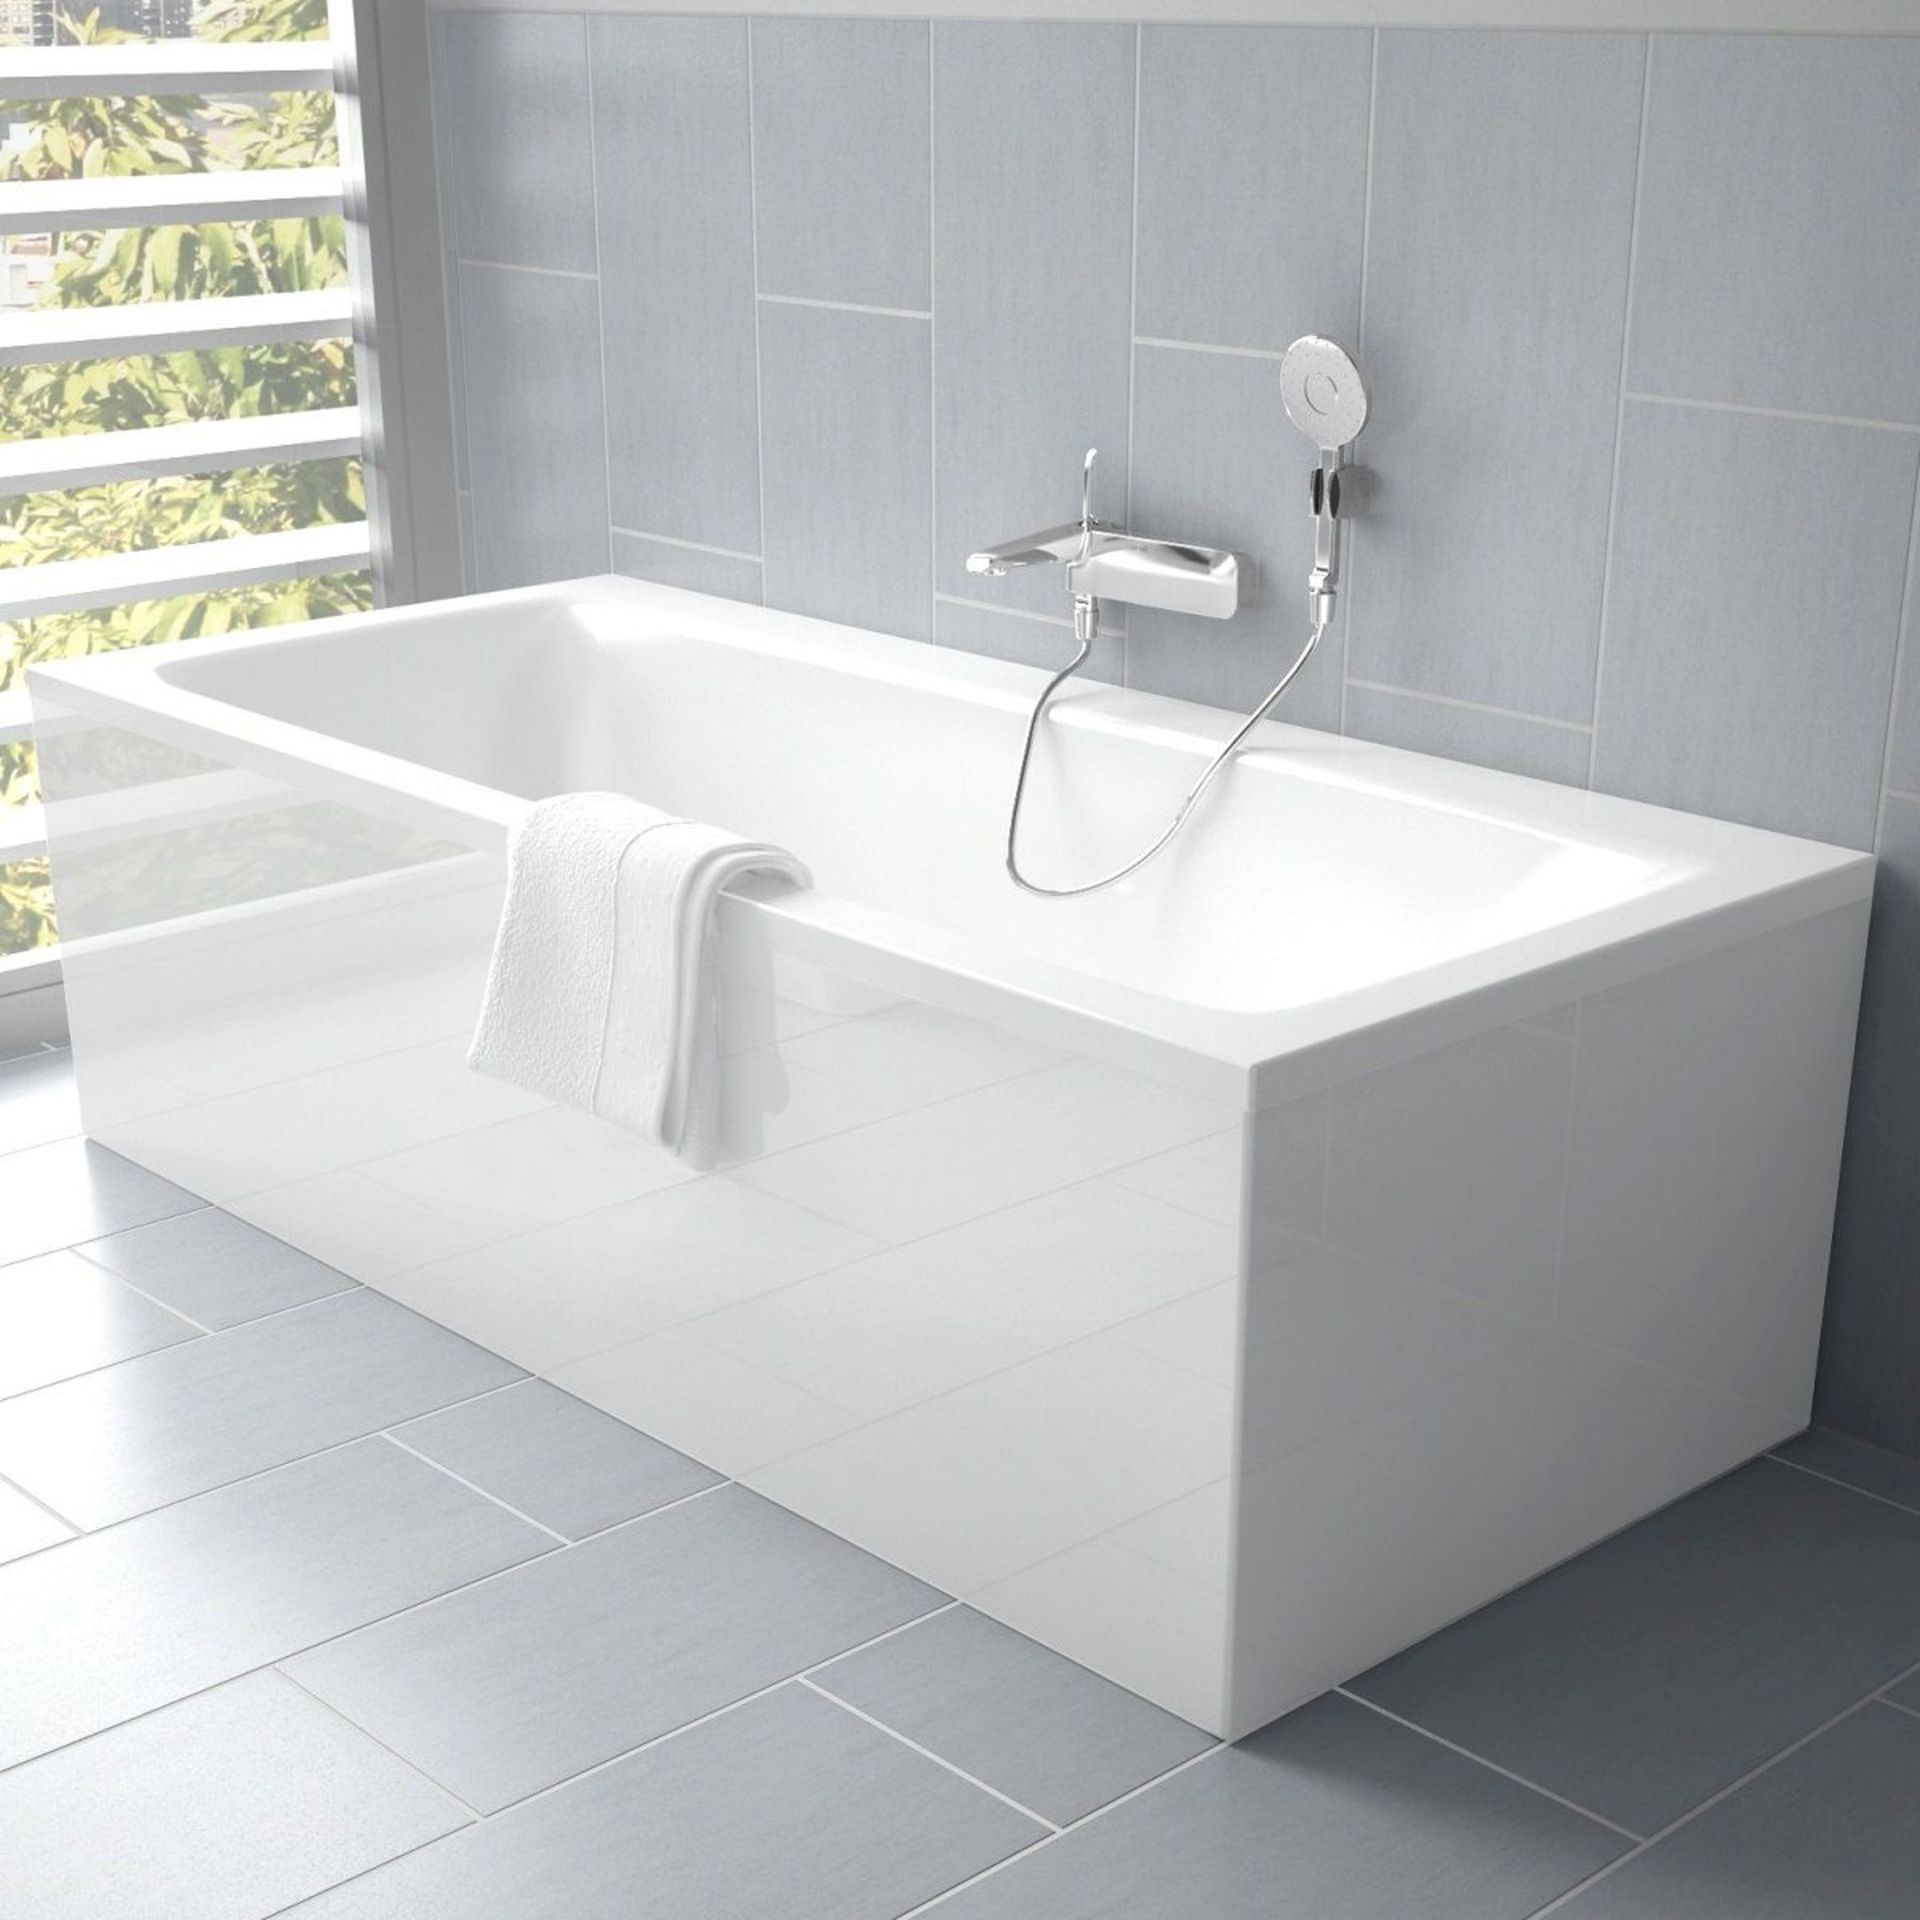 (PC2) 2000x900mm Keramag Deep Double Ended Bath. RRP £997.99. Our range of double ended baths...( - Image 2 of 5